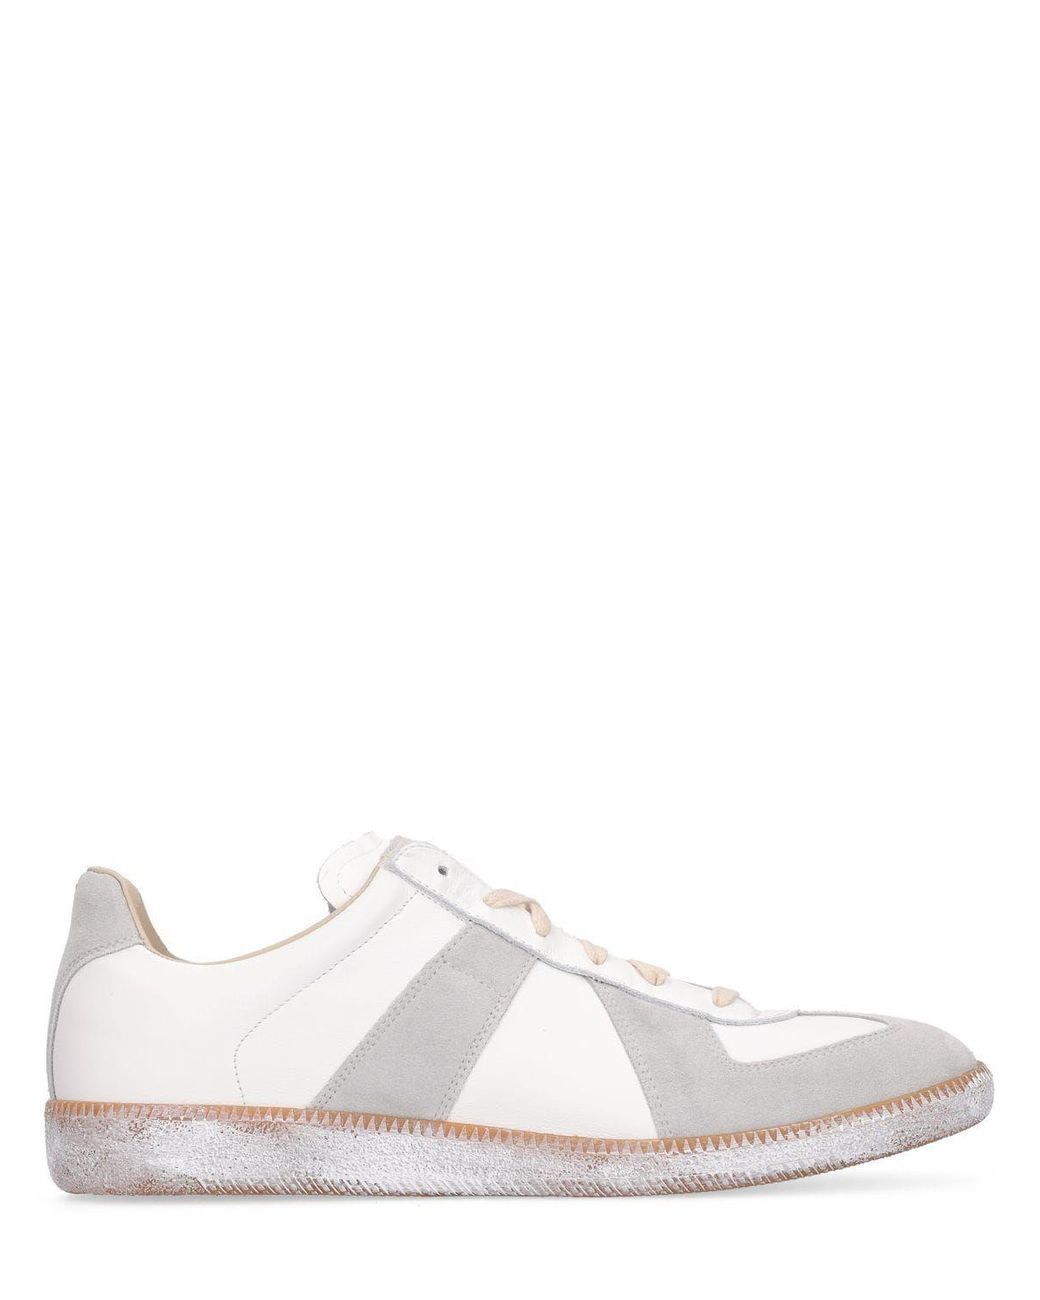 Maison Margiela Replica Bianchetto Leather Low Sneakers in White for ...